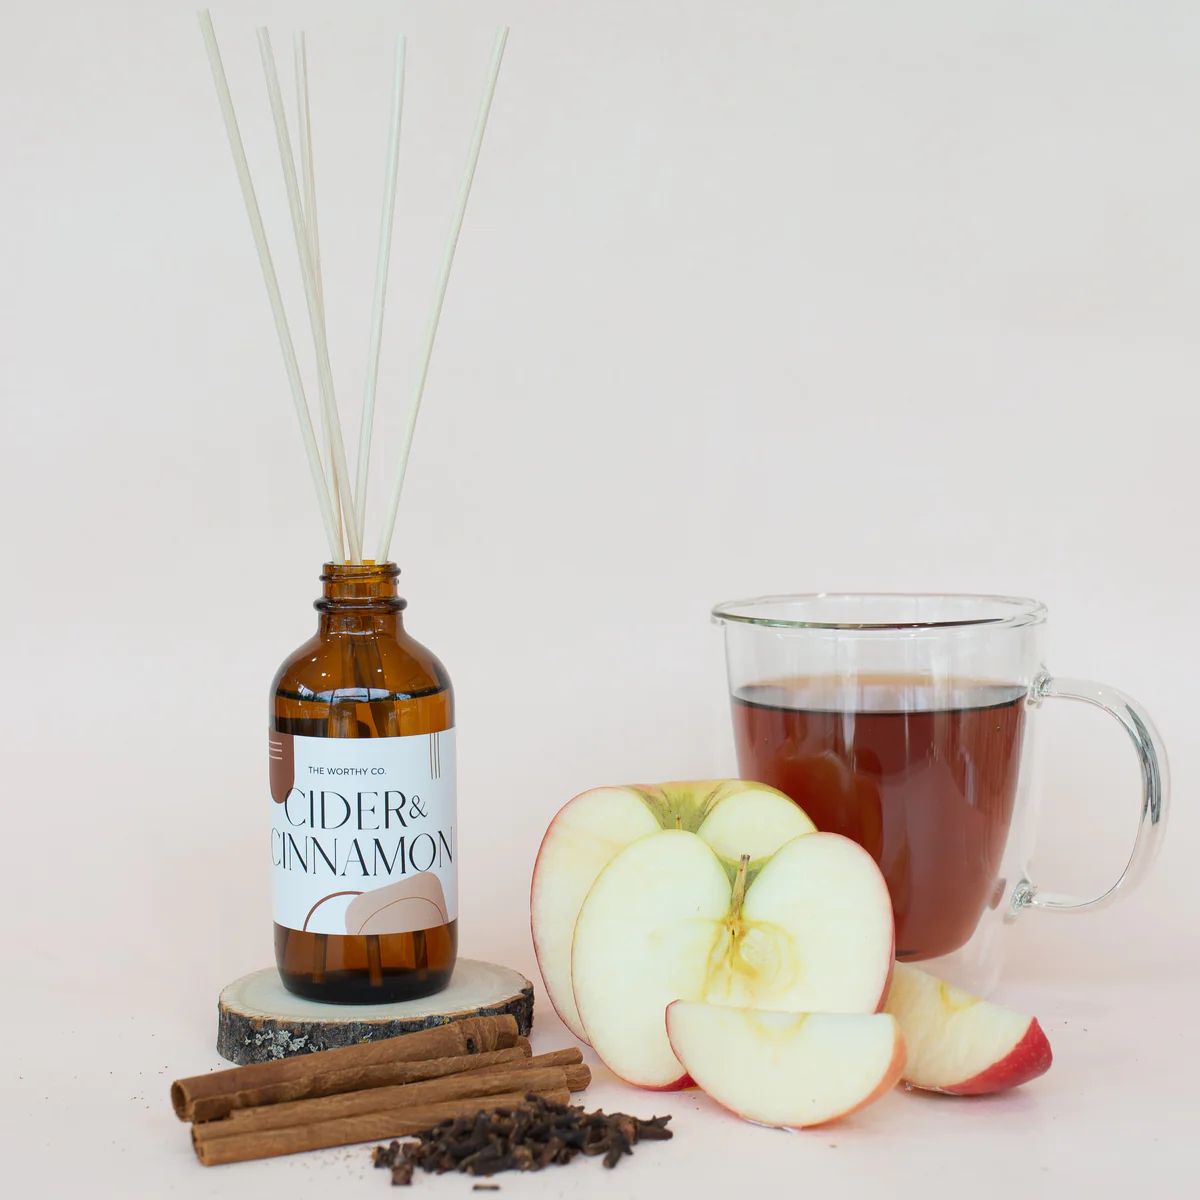 Reed Diffuser: Cider + Cinnamon | The Worthy Co.